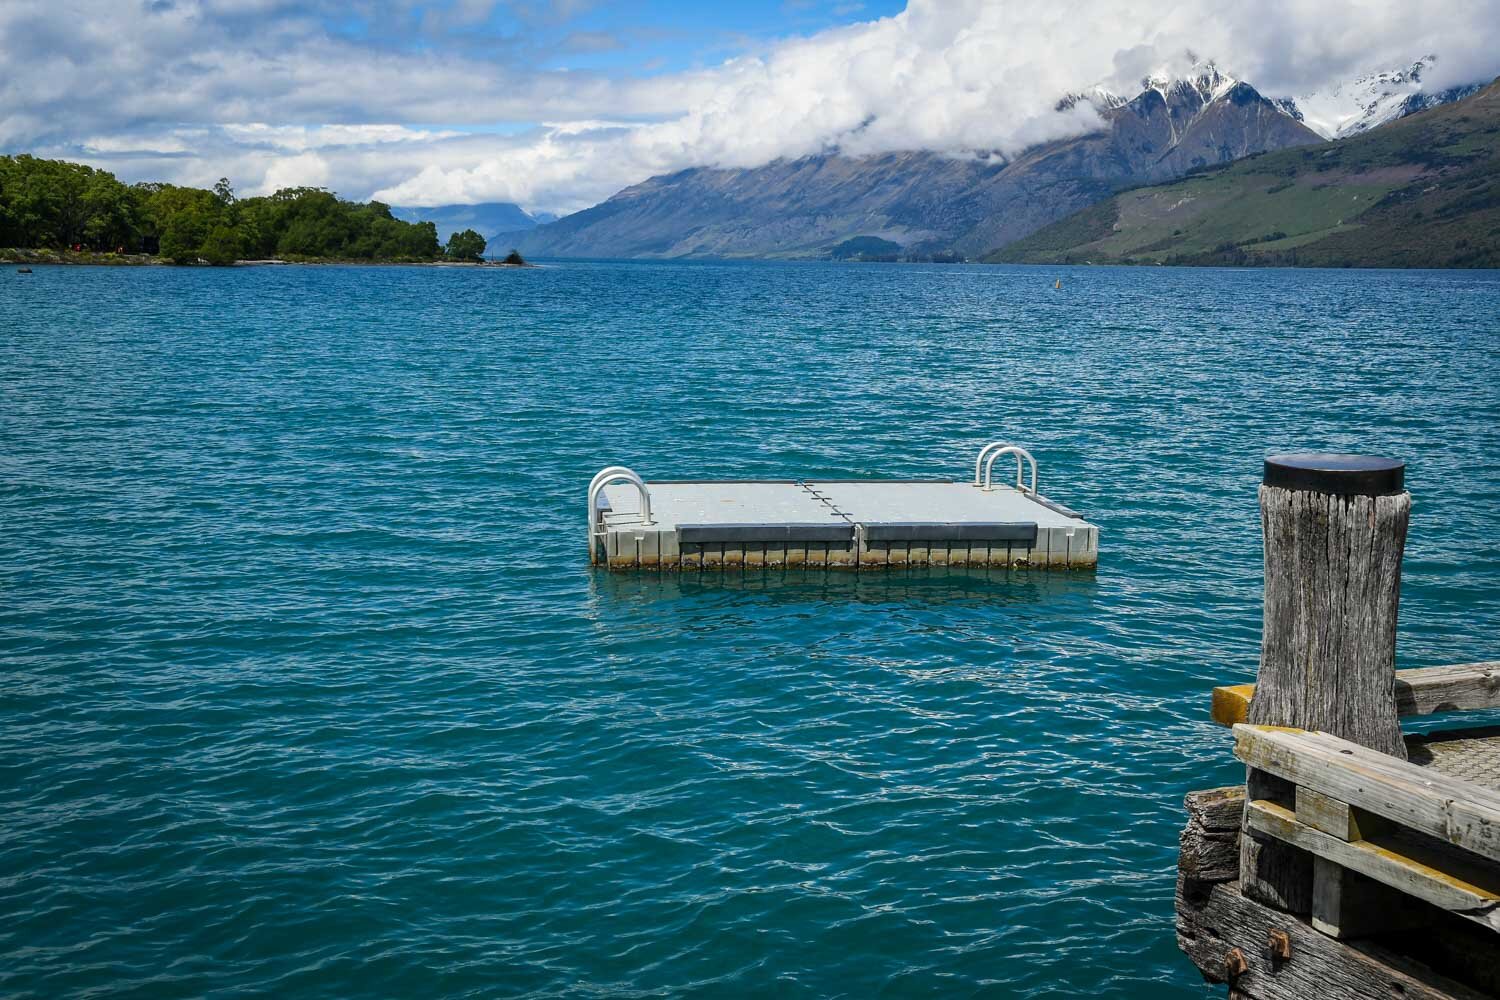 On a hot day, this dock in Glenorchy would be the perfect place to take a refreshing dip!